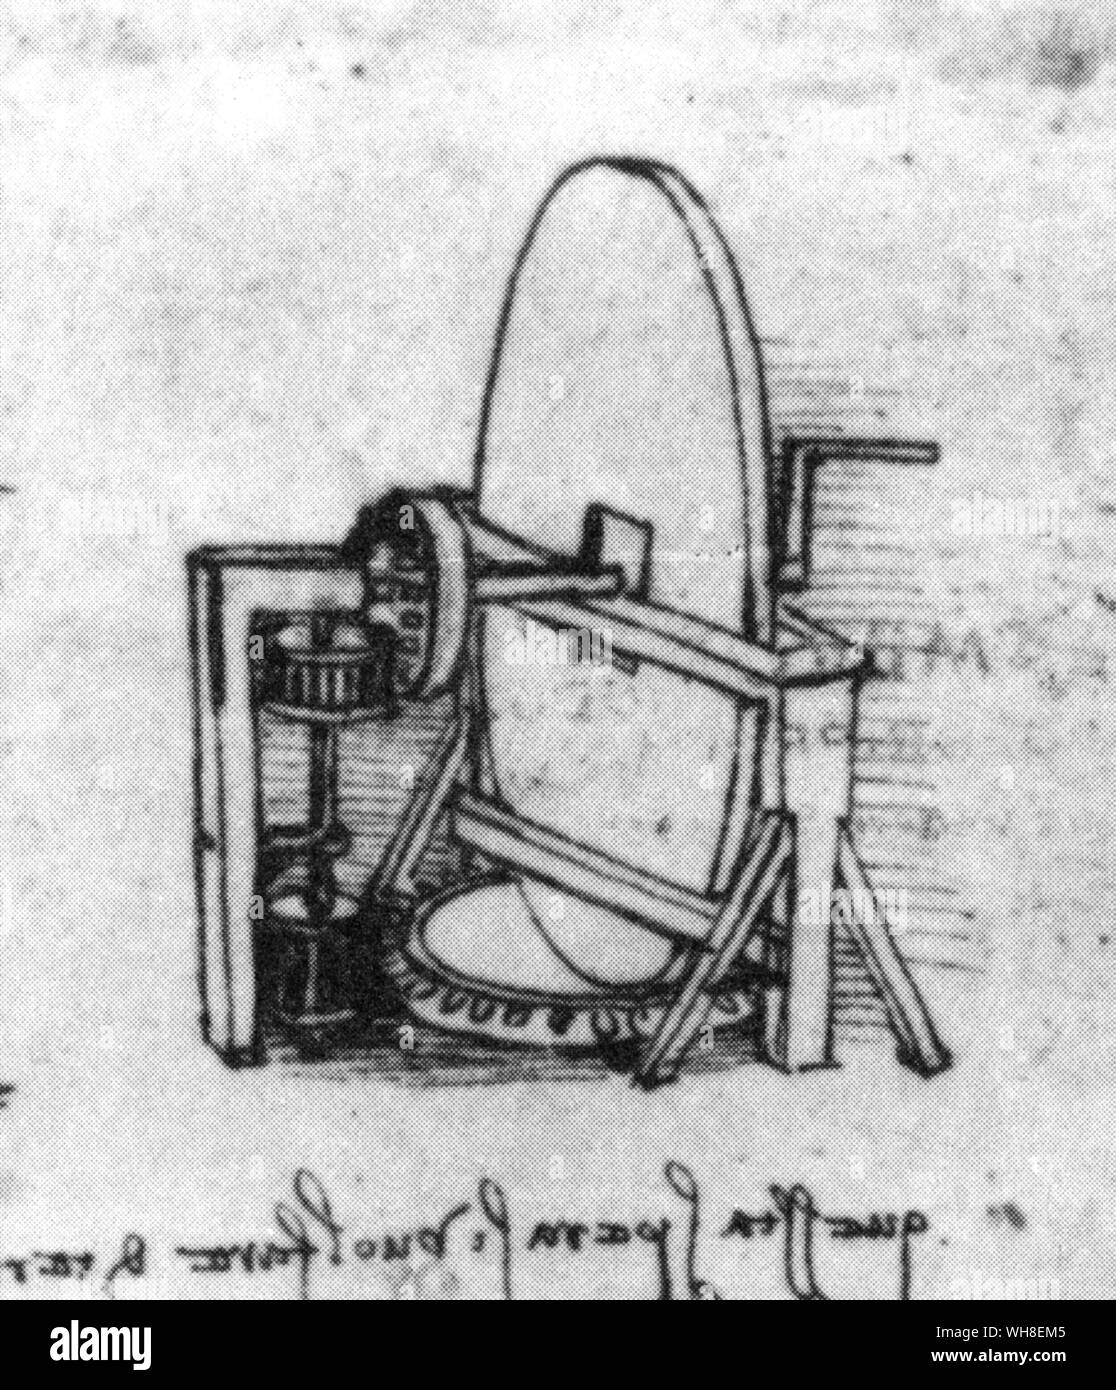 When the handle of the lens grinder is turned, both grindstone and lens revolve at different speeds. Leonardo da Vinci (1452-1519) was an Italian Renaissance architect, musician, anatomist, inventor, engineer, sculptor, geometer and painter. . . Stock Photo